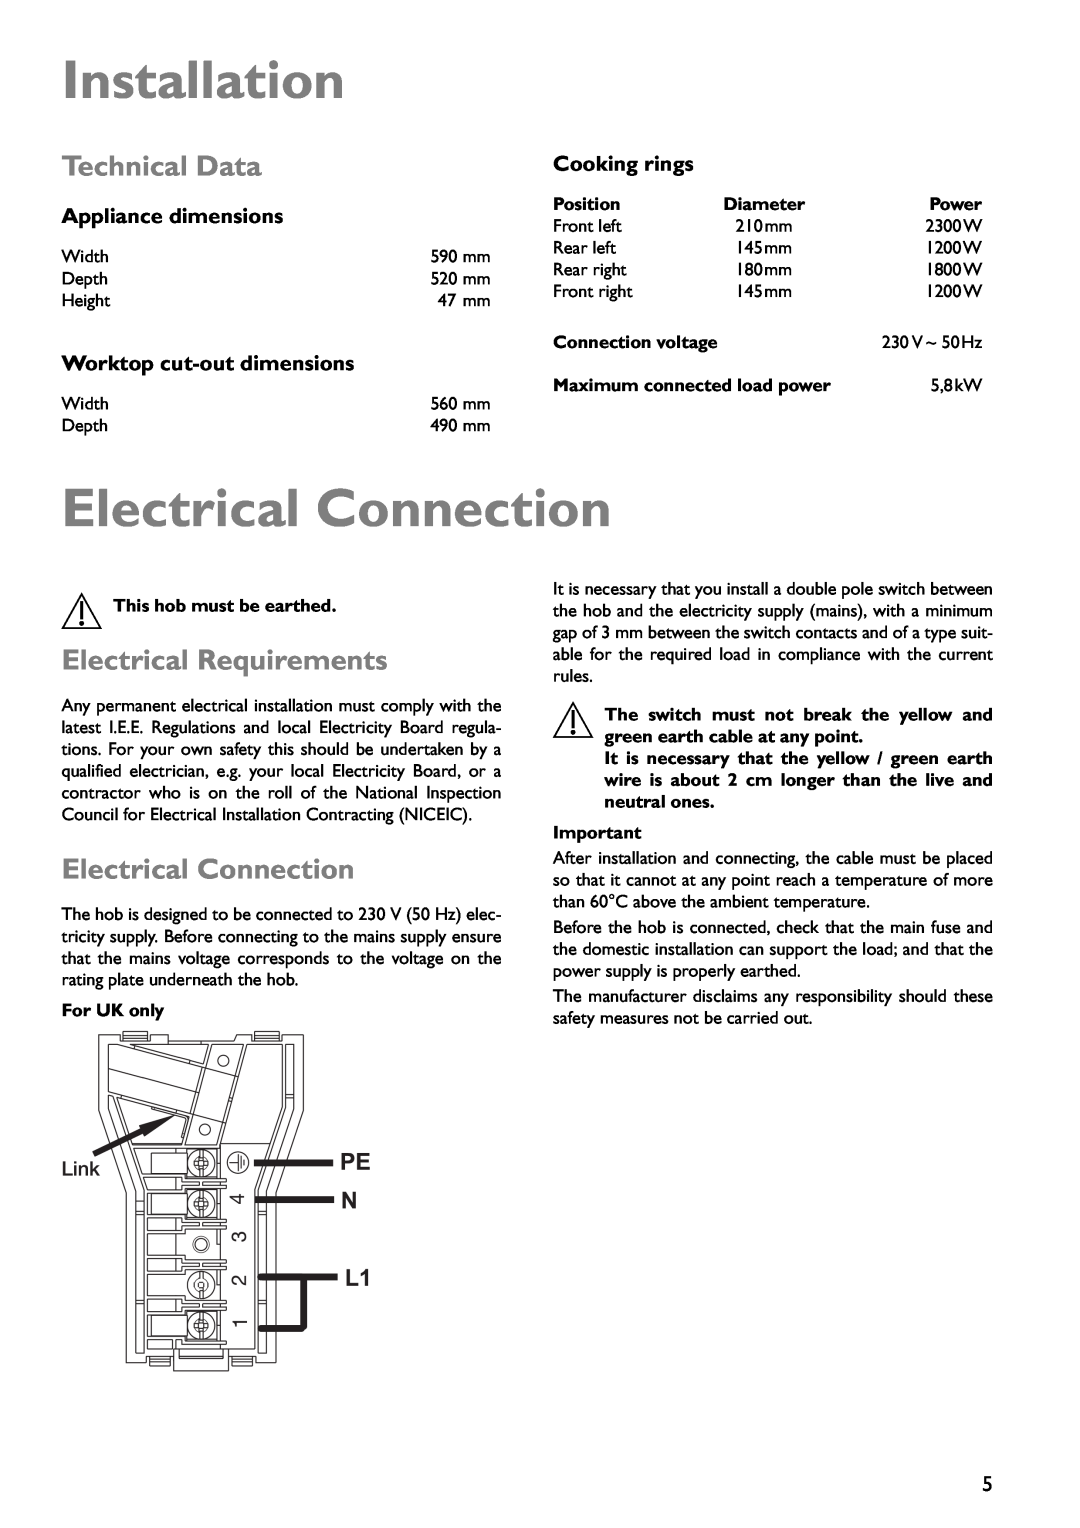 John Lewis JLBICH602 Installation, Electrical Connection, Technical Data, Electrical Requirements, Cooking rings, Position 